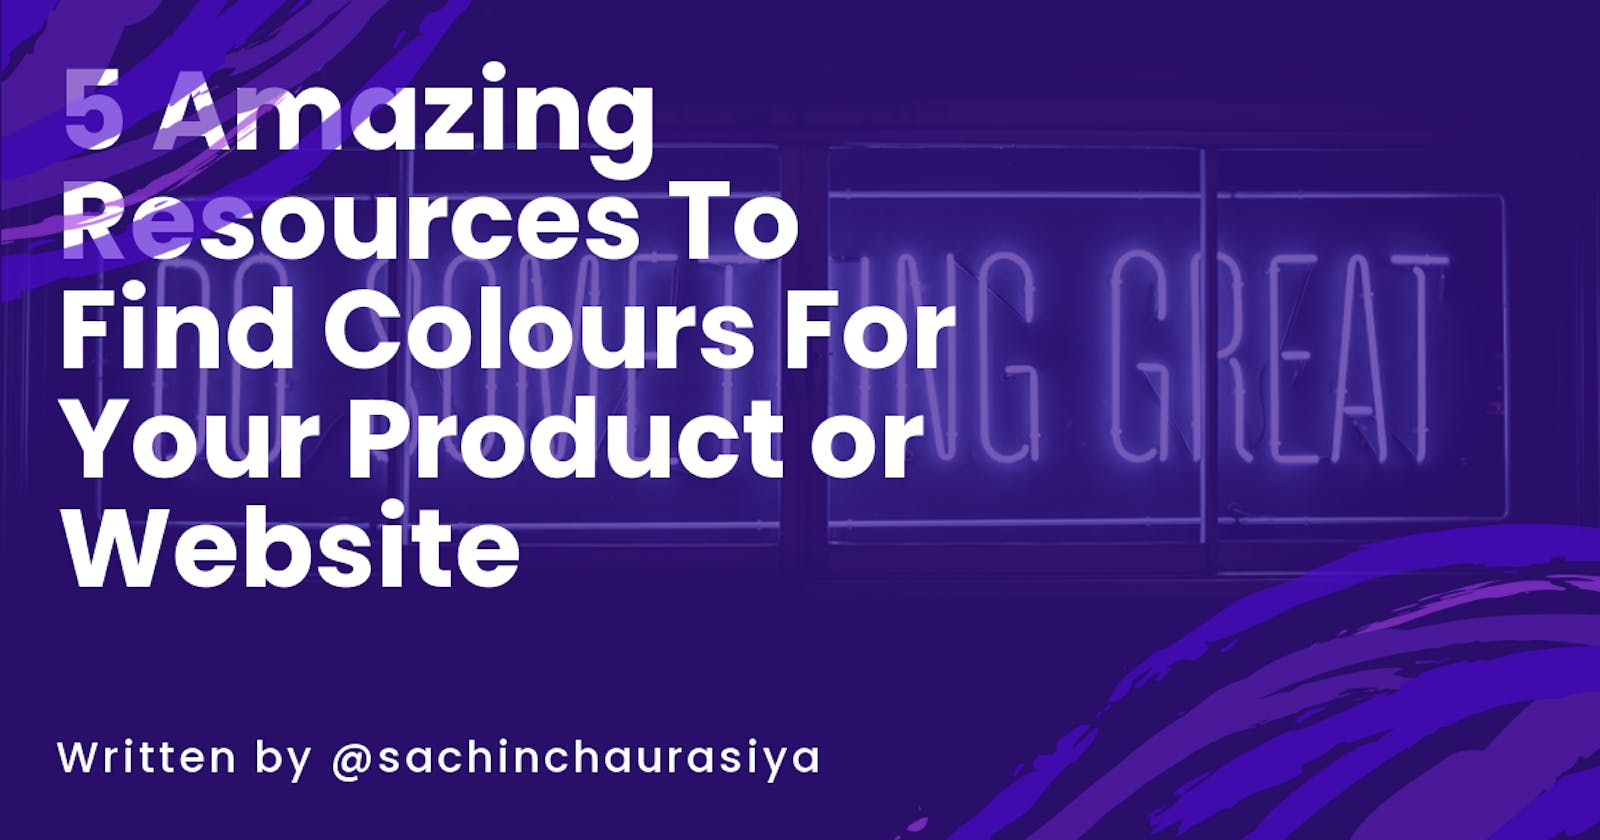 5 Amazing Resources To Find Colours For Your Product or Website